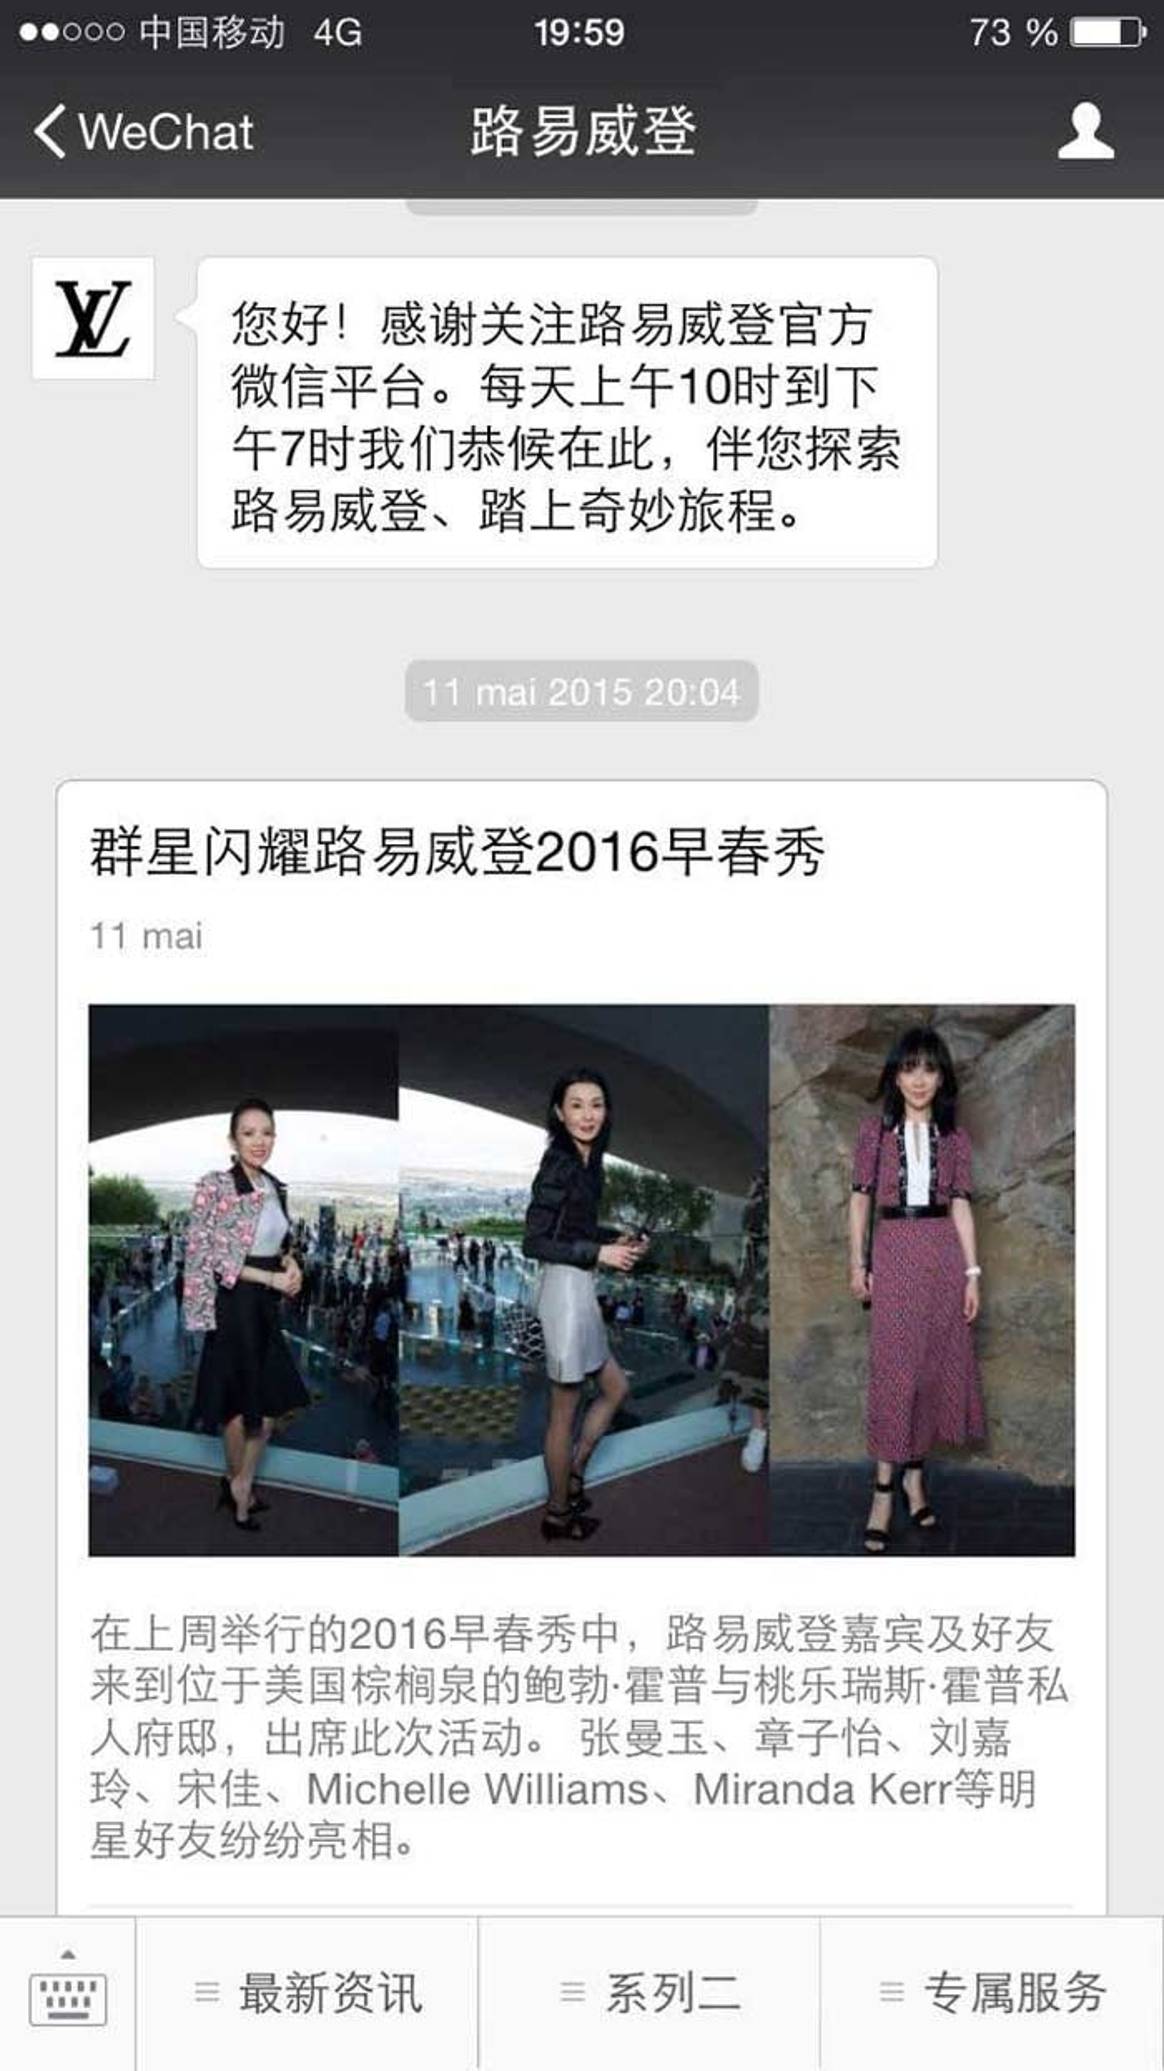 How to promote a fashion brand in China